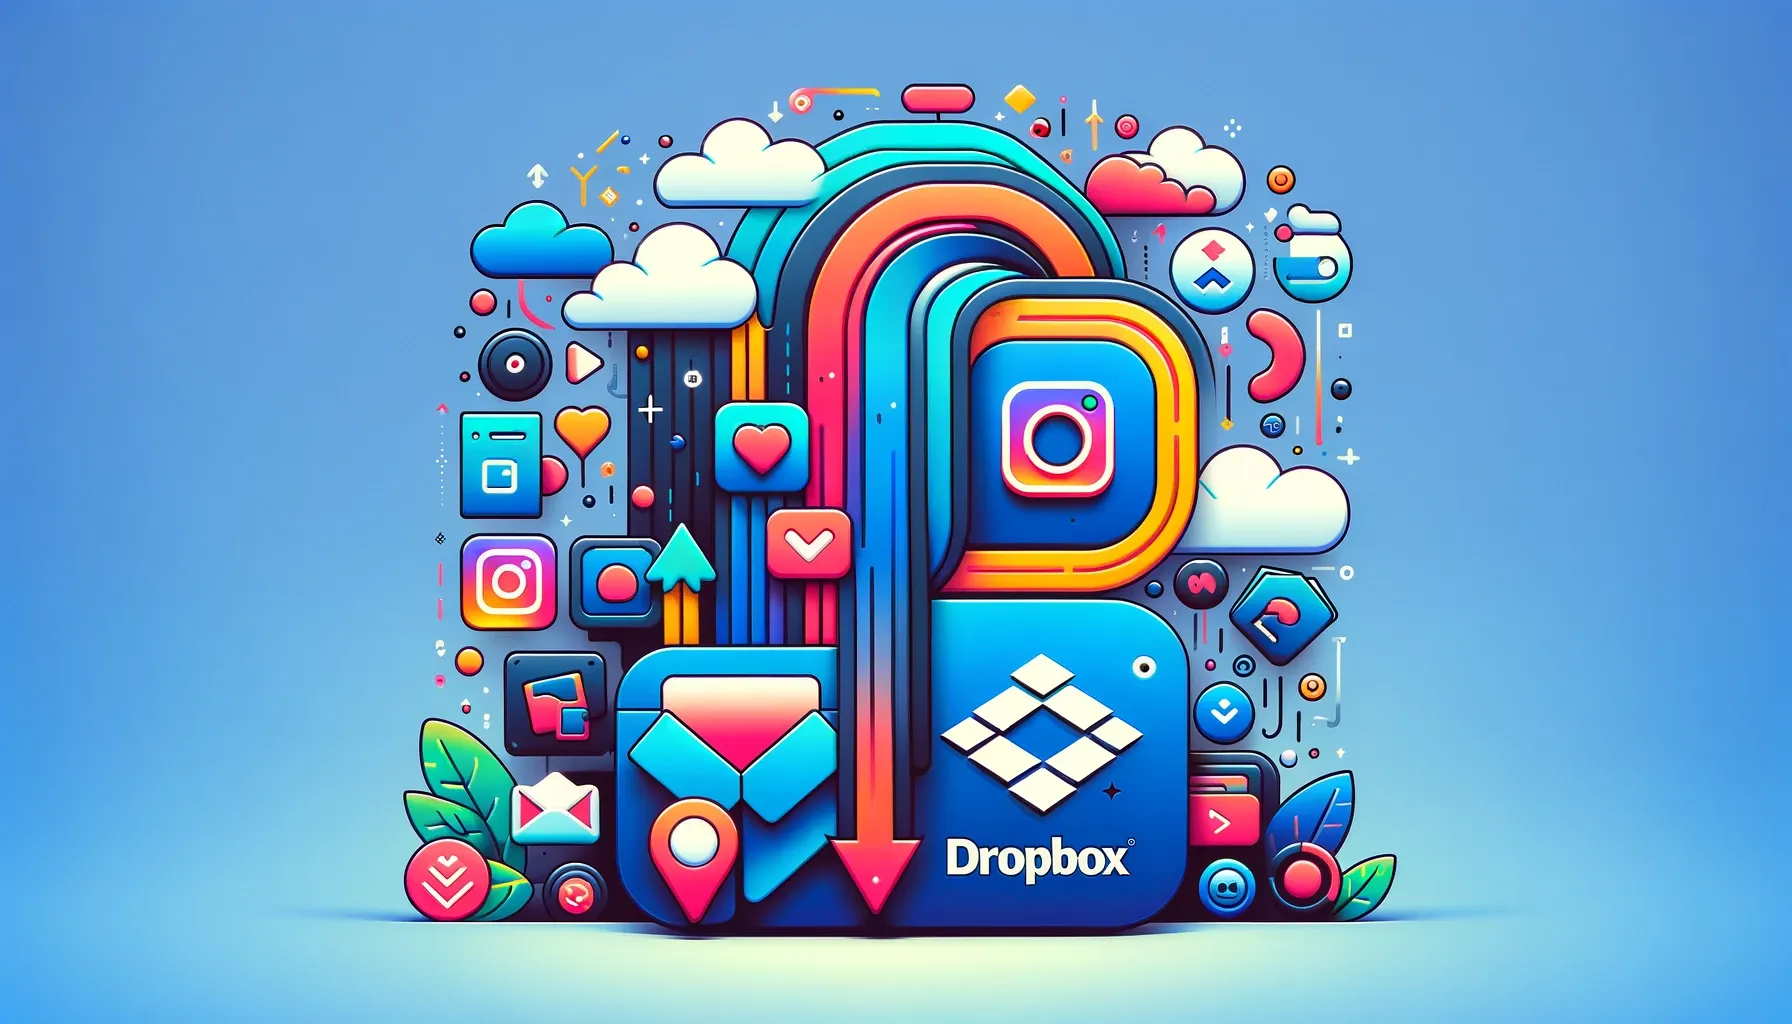 How to upload photos from Instagram to Dropbox?